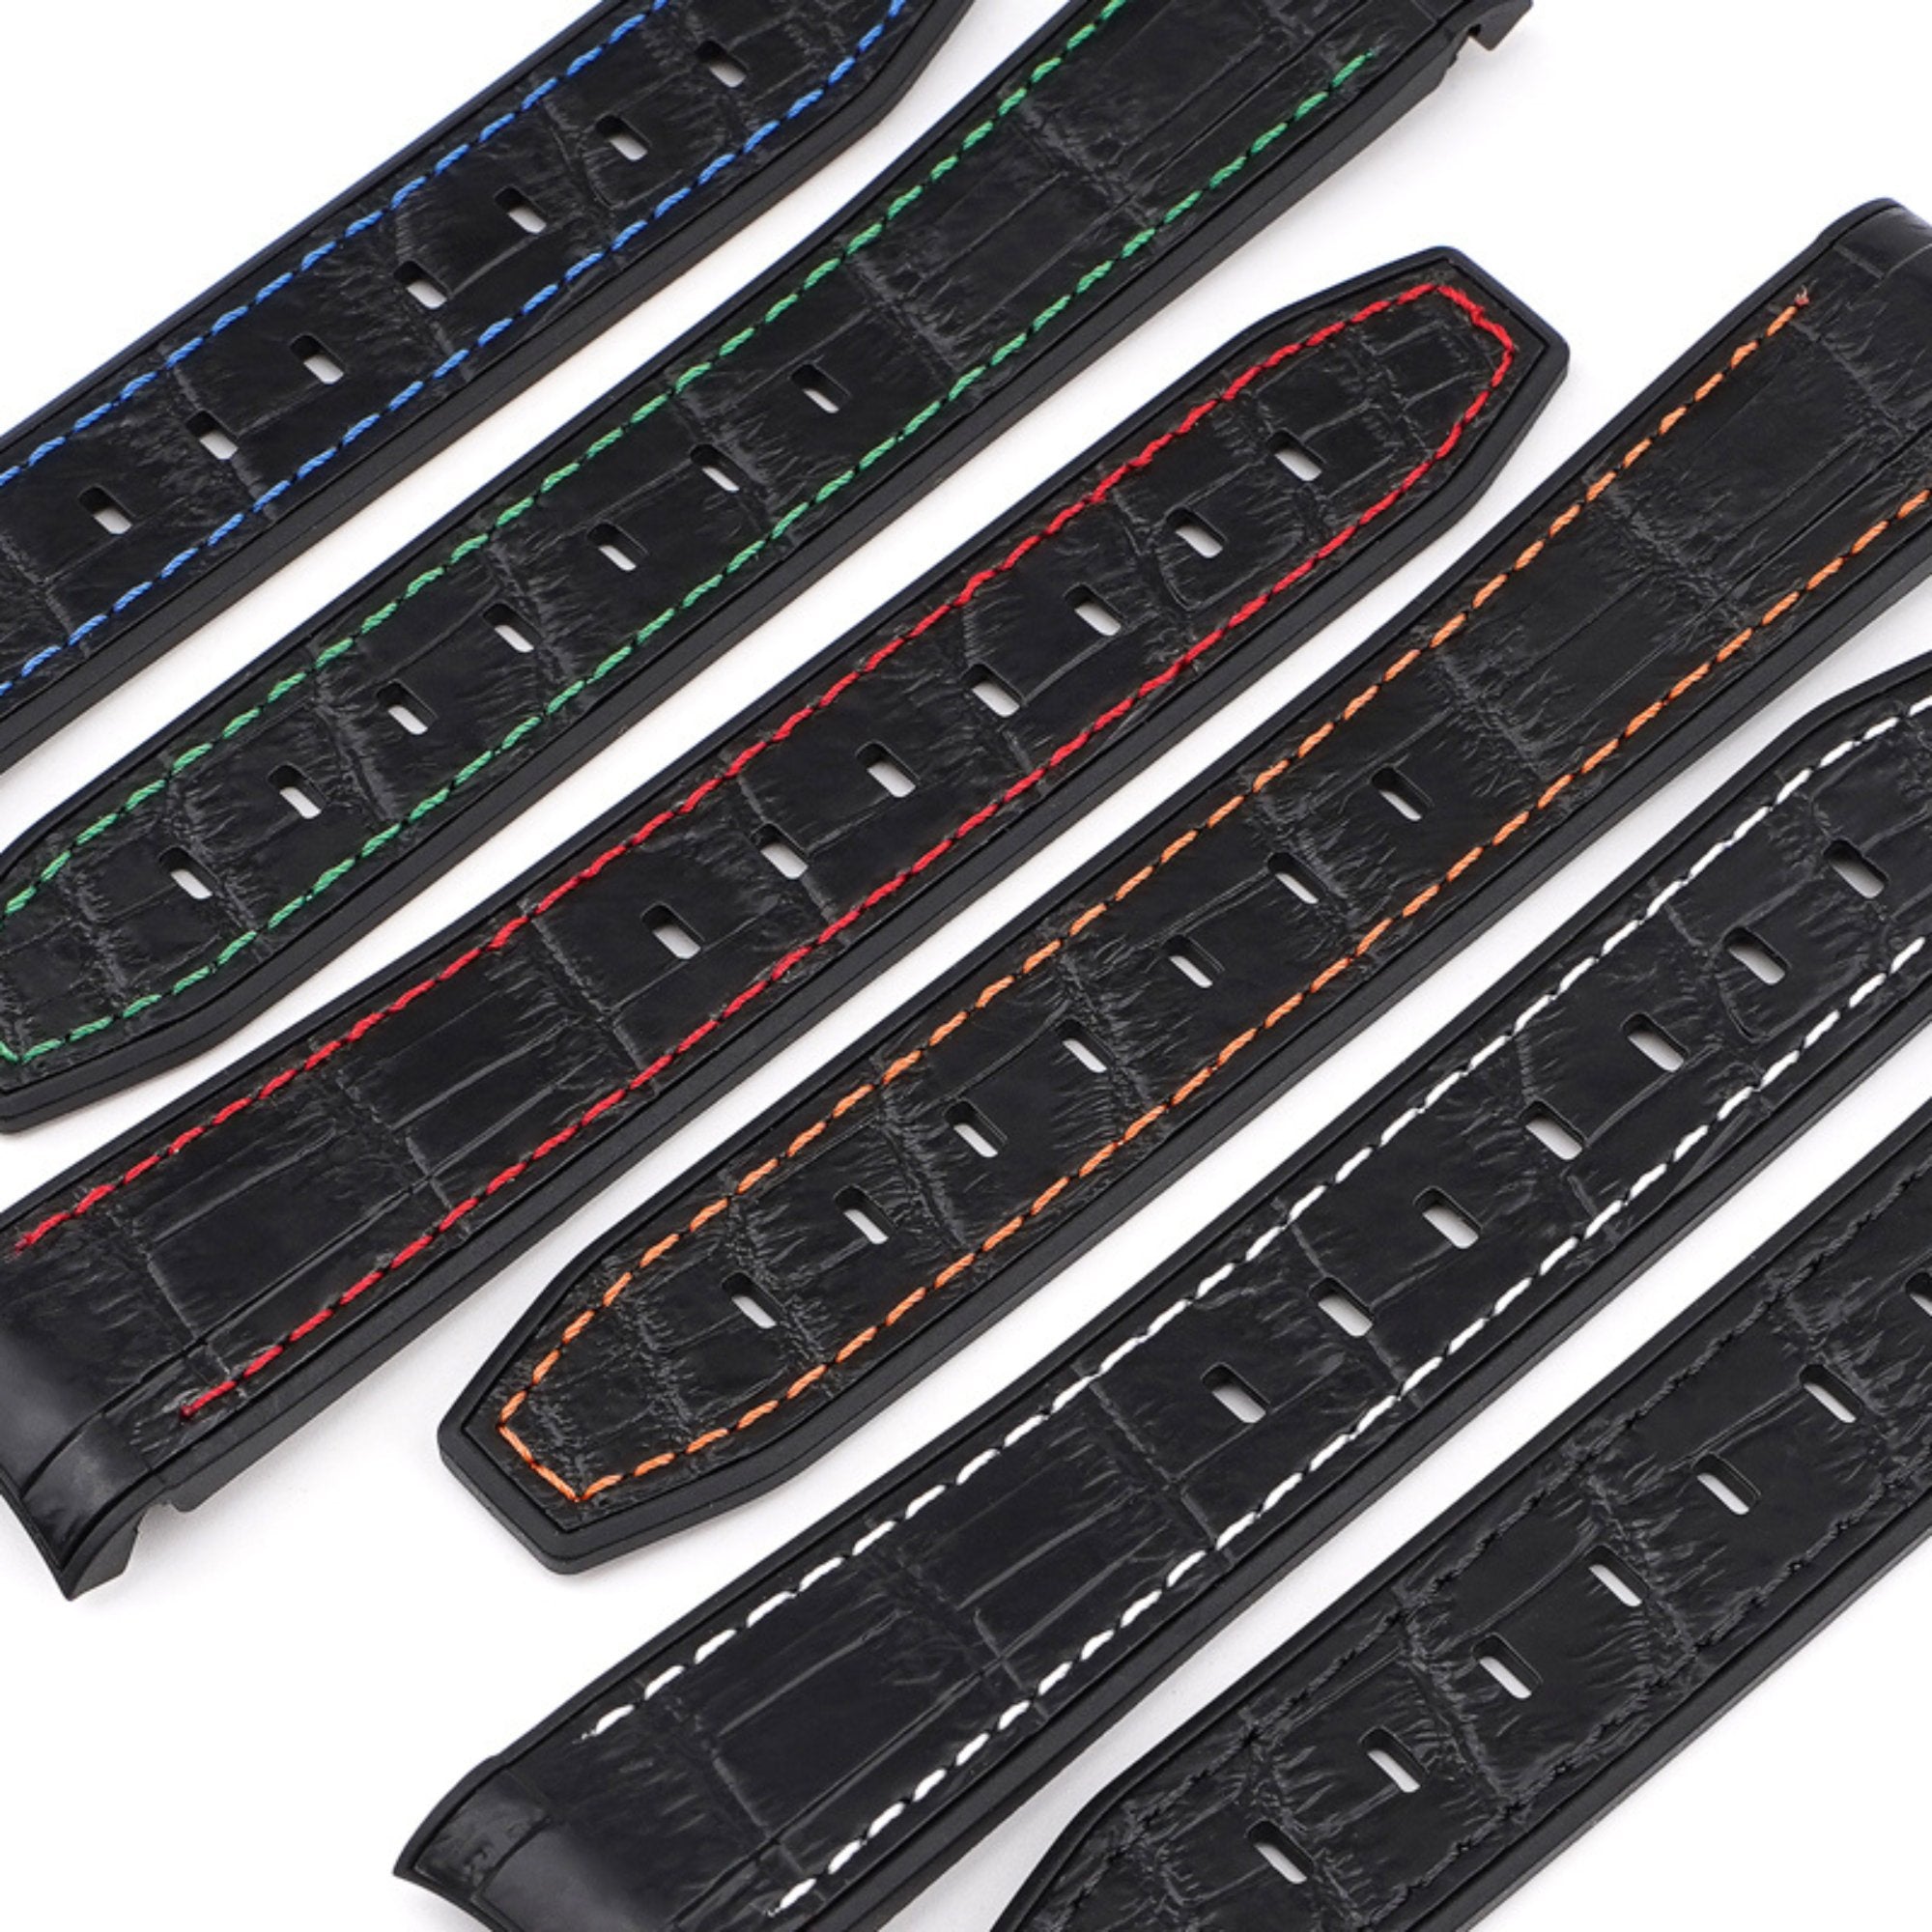 Alligator Embossed Curved End Premium Silicone Strap - Compatible with Omega x Swatch - Black with Orange Stitch (2406) -StrapSeeker